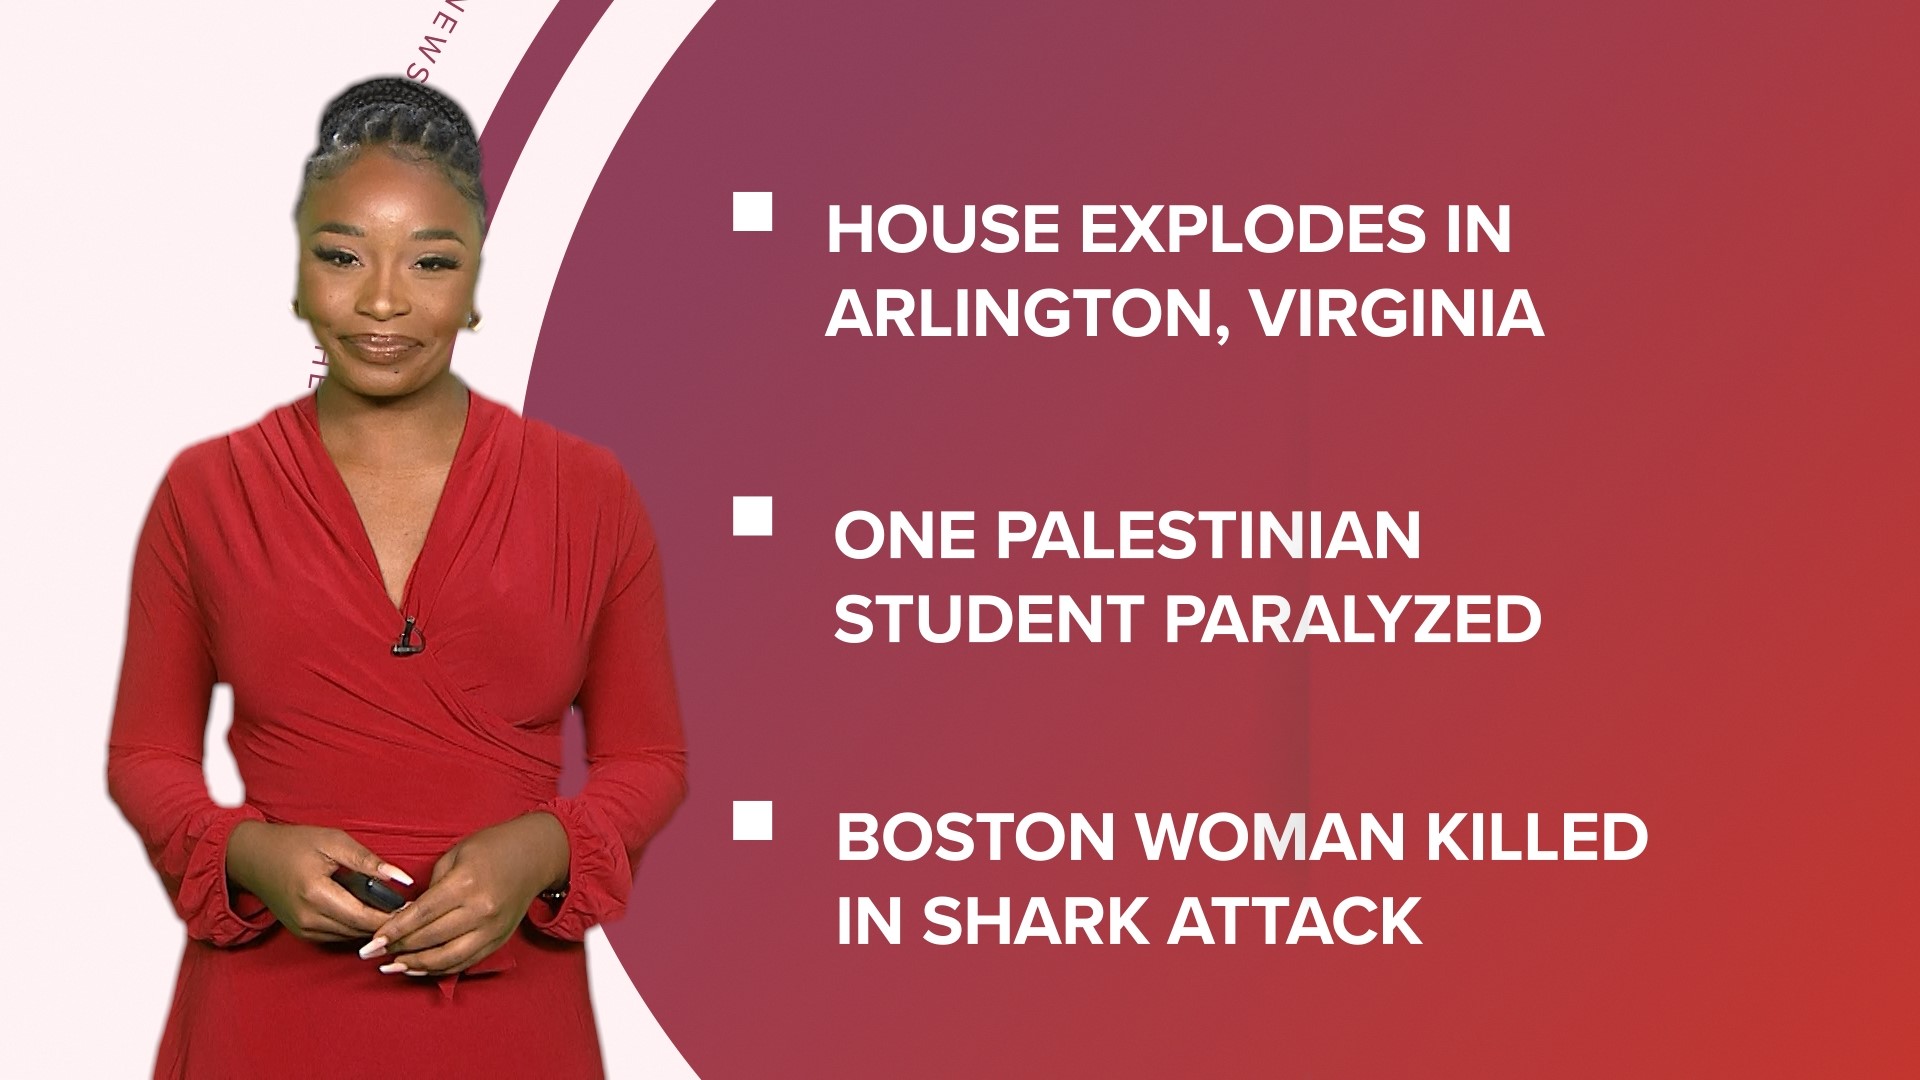 A look at what is happening in the news from a house explosion in Arlington, Virginia to a shark attack kills a Boston woman and the word's of the 2023.